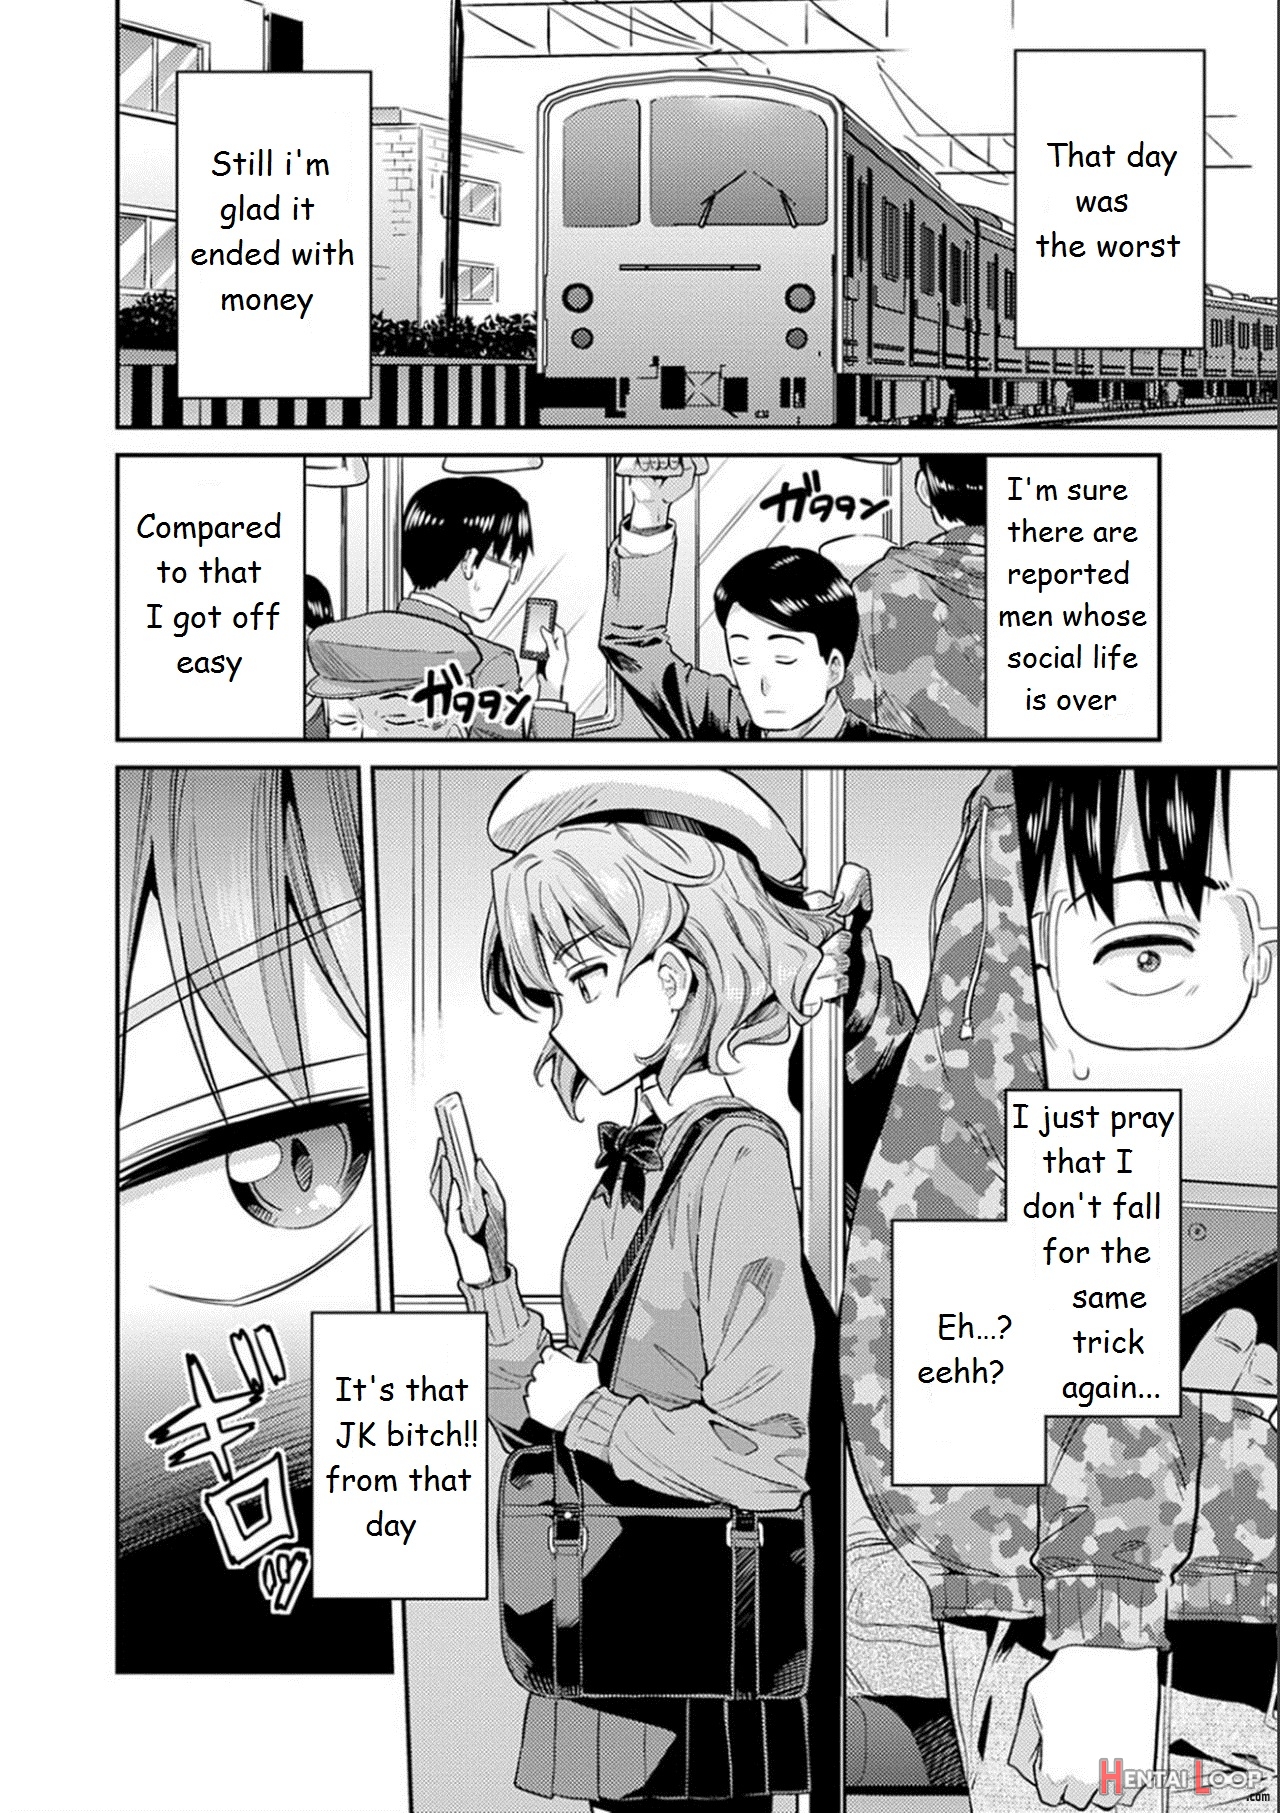 The Girl Who Cried Molester Kyousei Tanetsuke Express - Forced Seeding Express 1st Story page 5